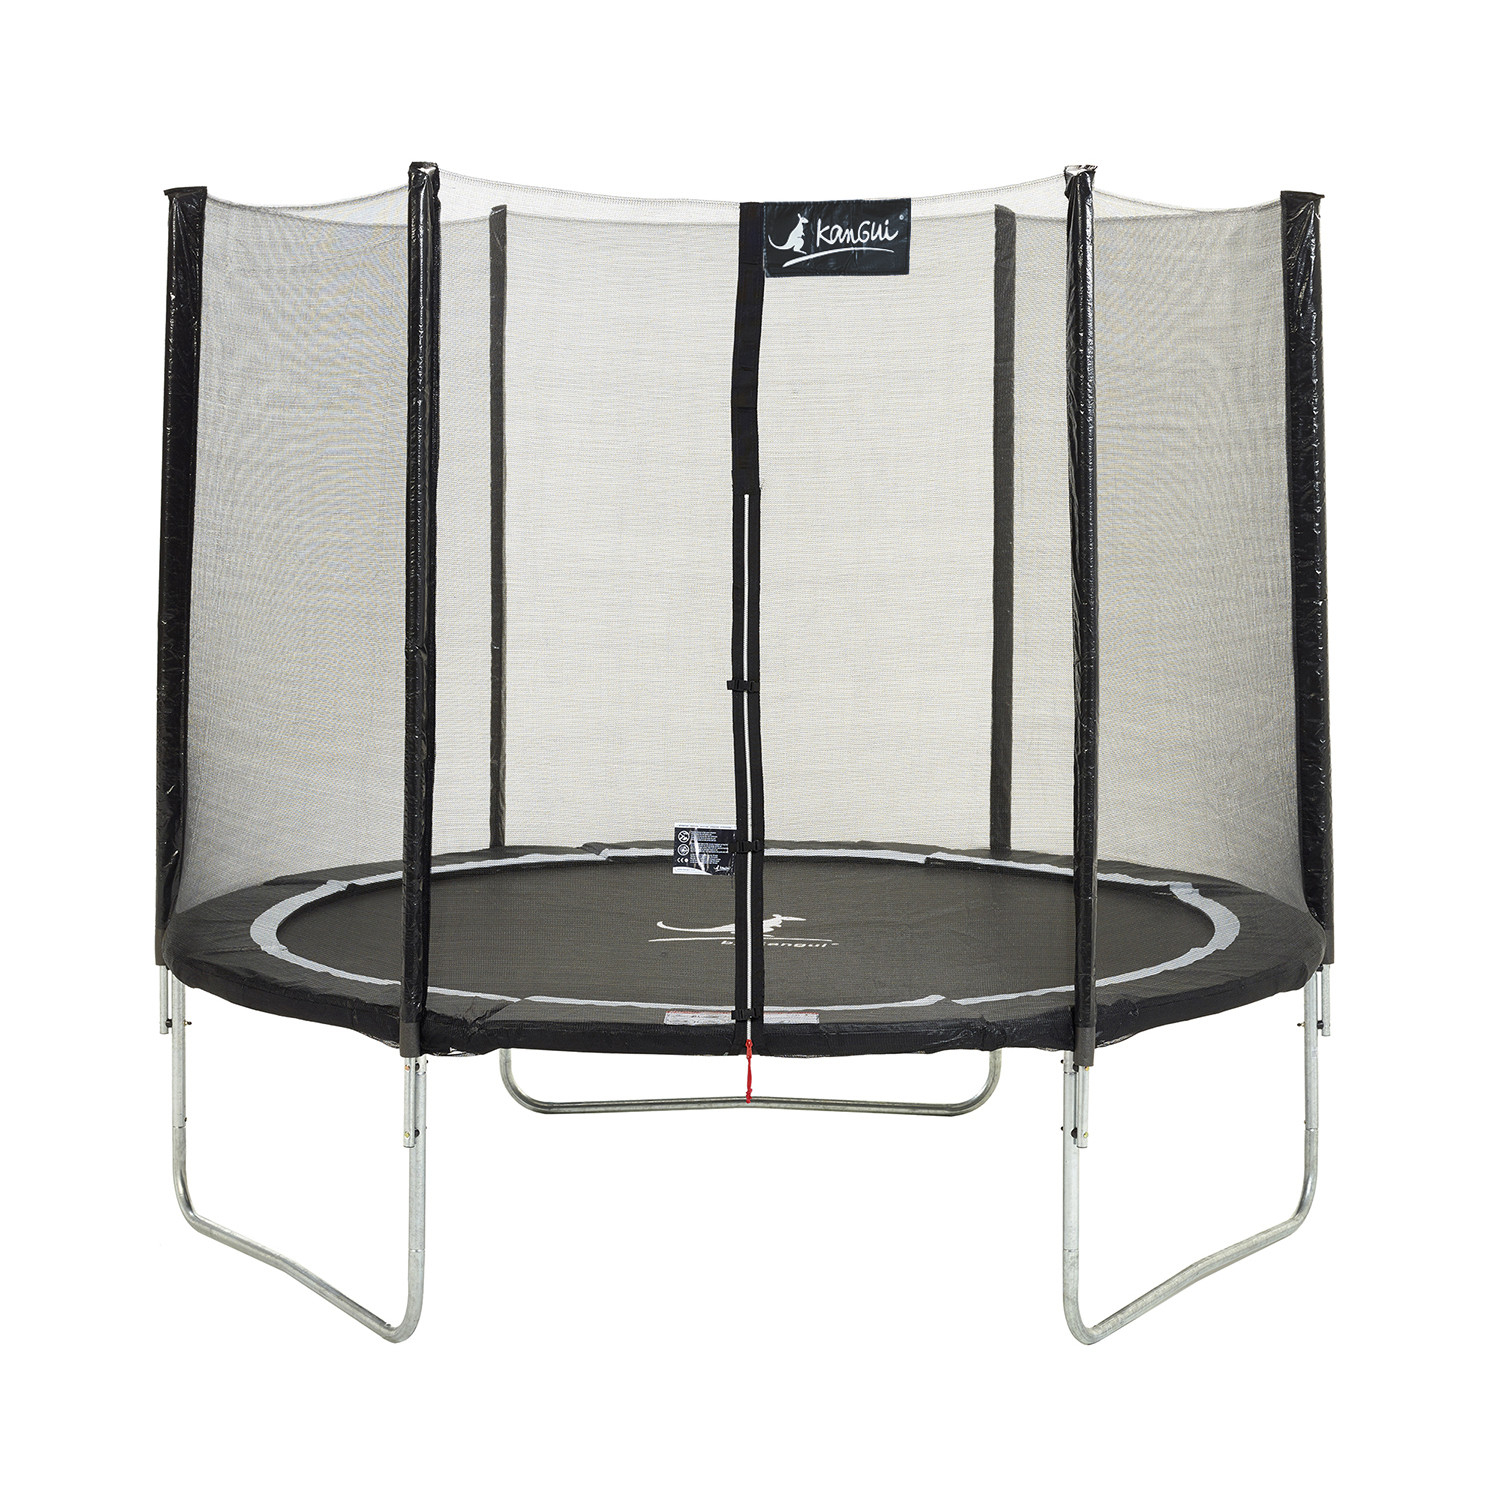 Trampoline Black collection